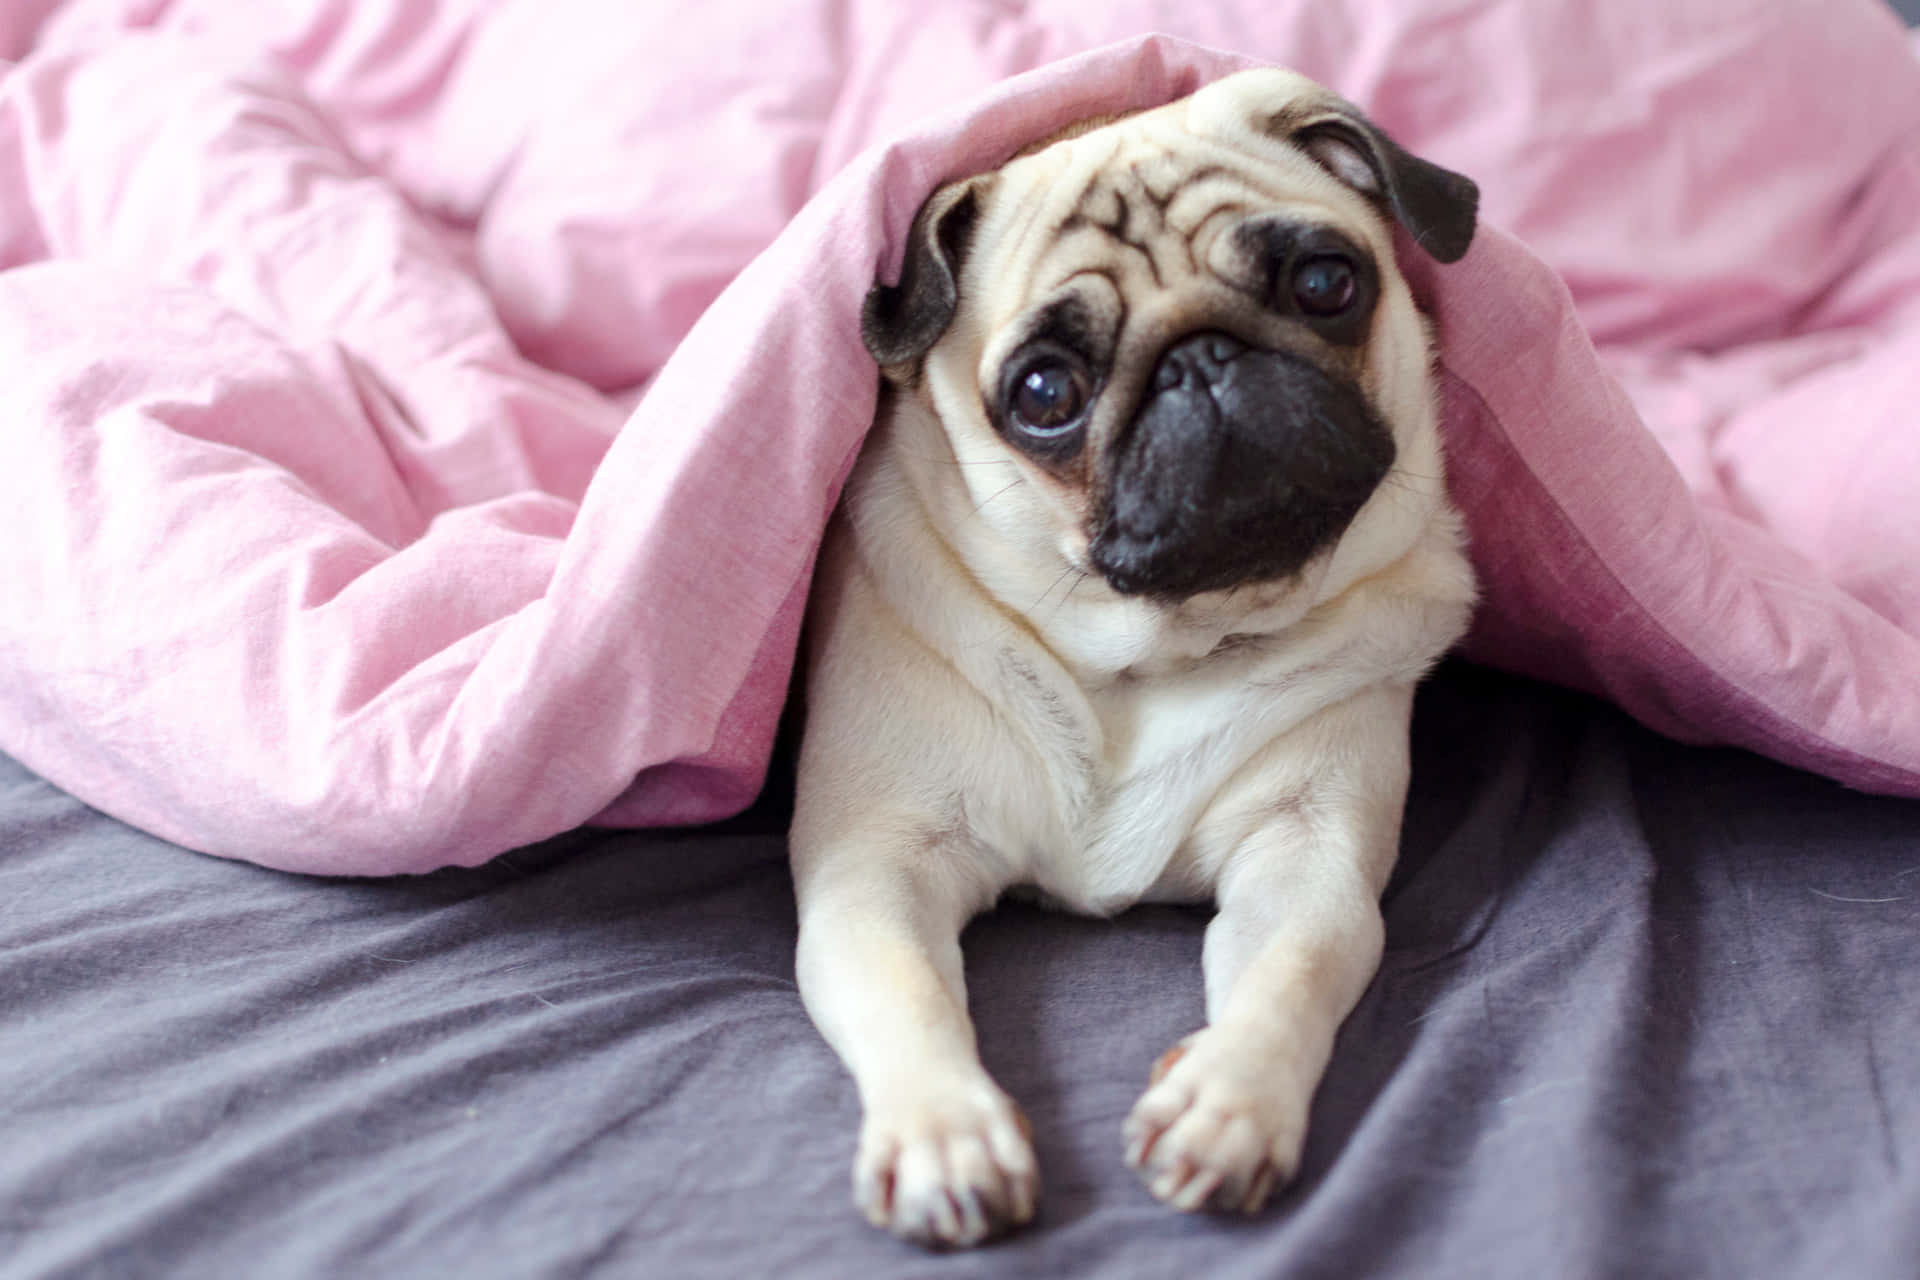 Cute Pug On A Pink Blanket Picture